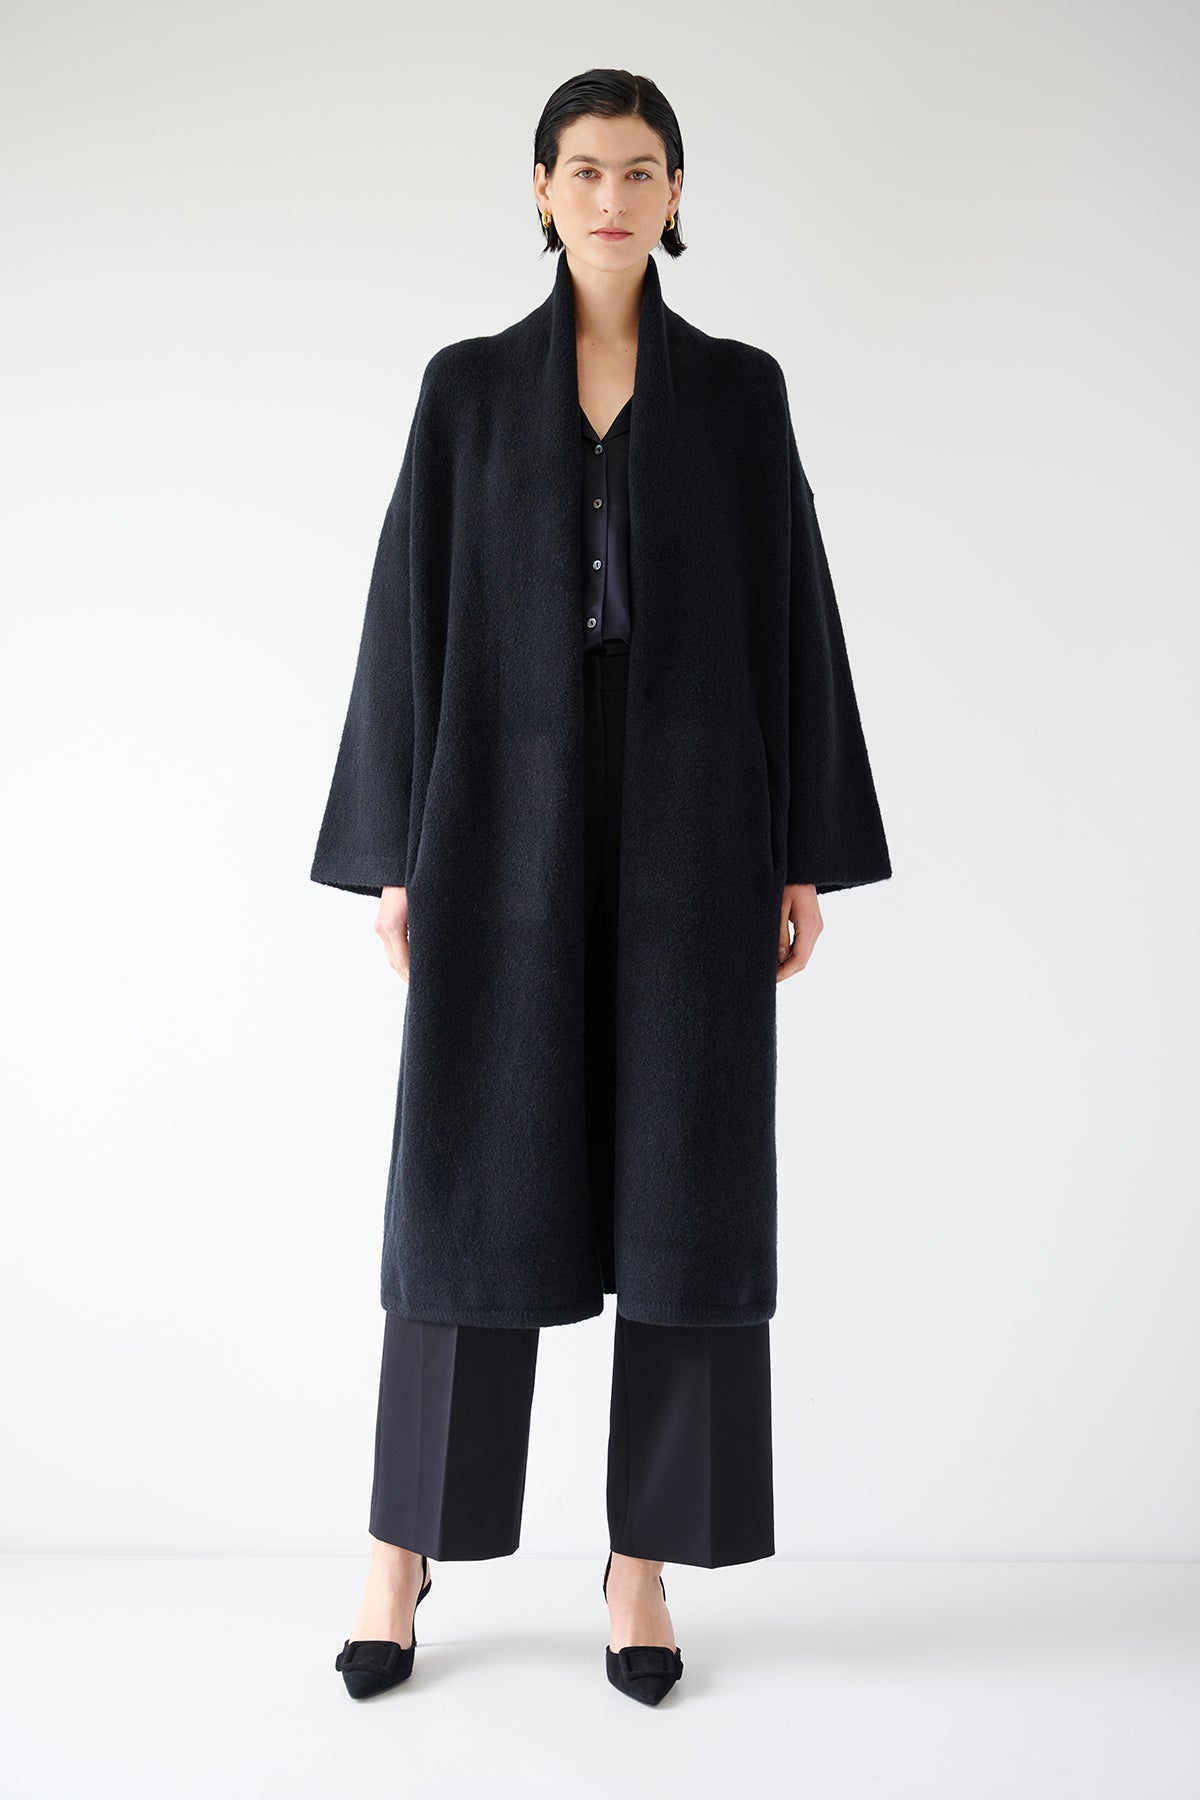 A woman donning a black Carmel Coat by Velvet by Jenny Graham and wool pants.-35547930329281